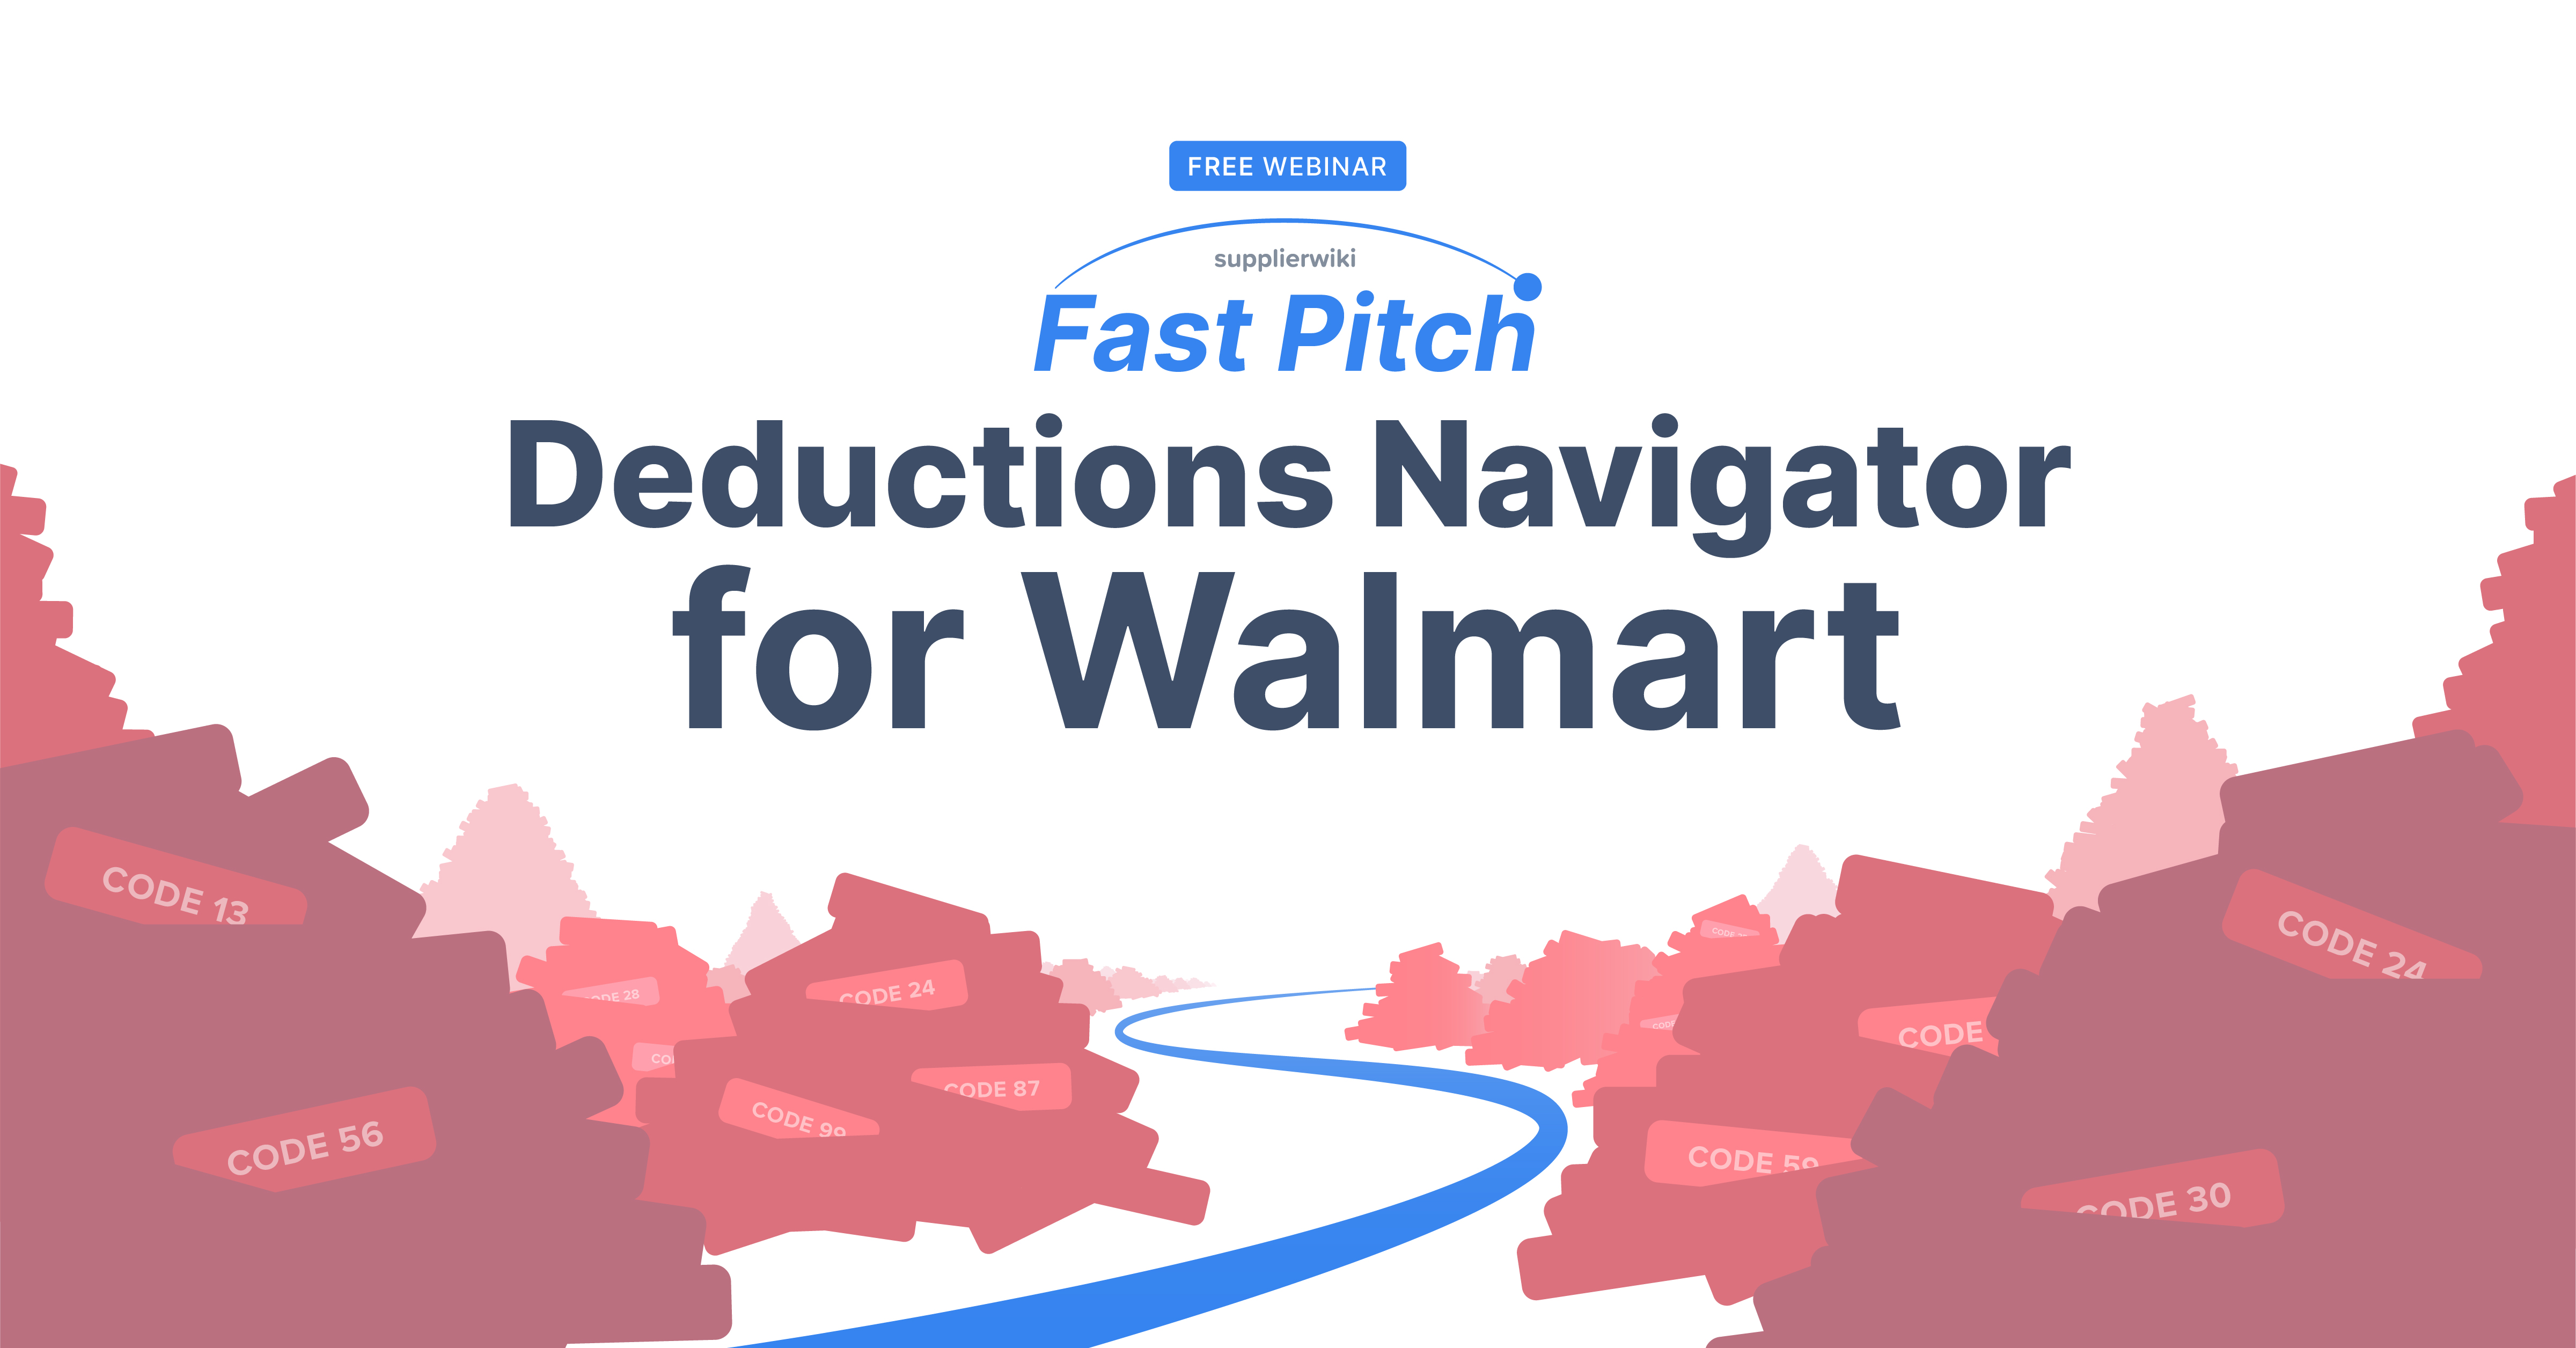 Deductions Navigator for Walmart Fast Pitch